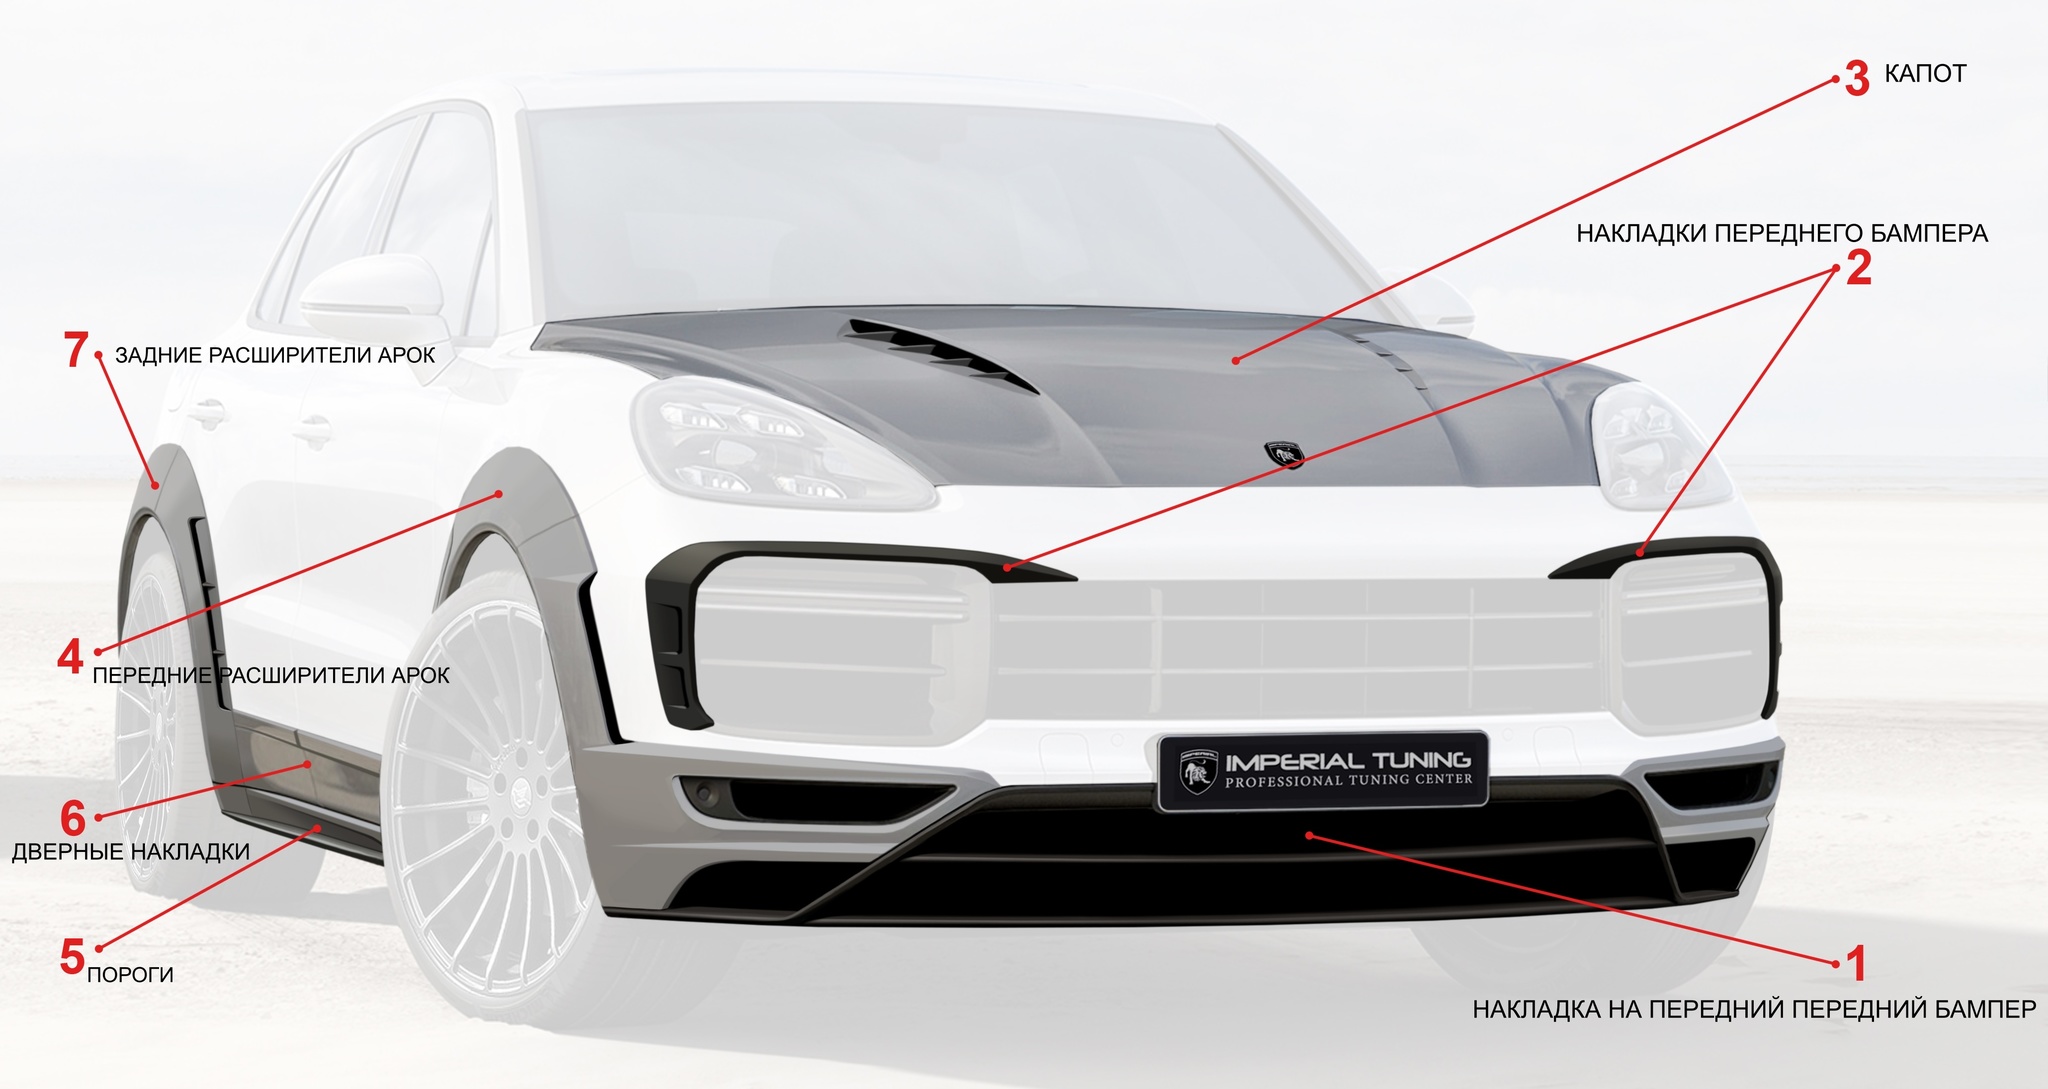 Imperial body kit for Porsche Cayenne 959 Turbo 1